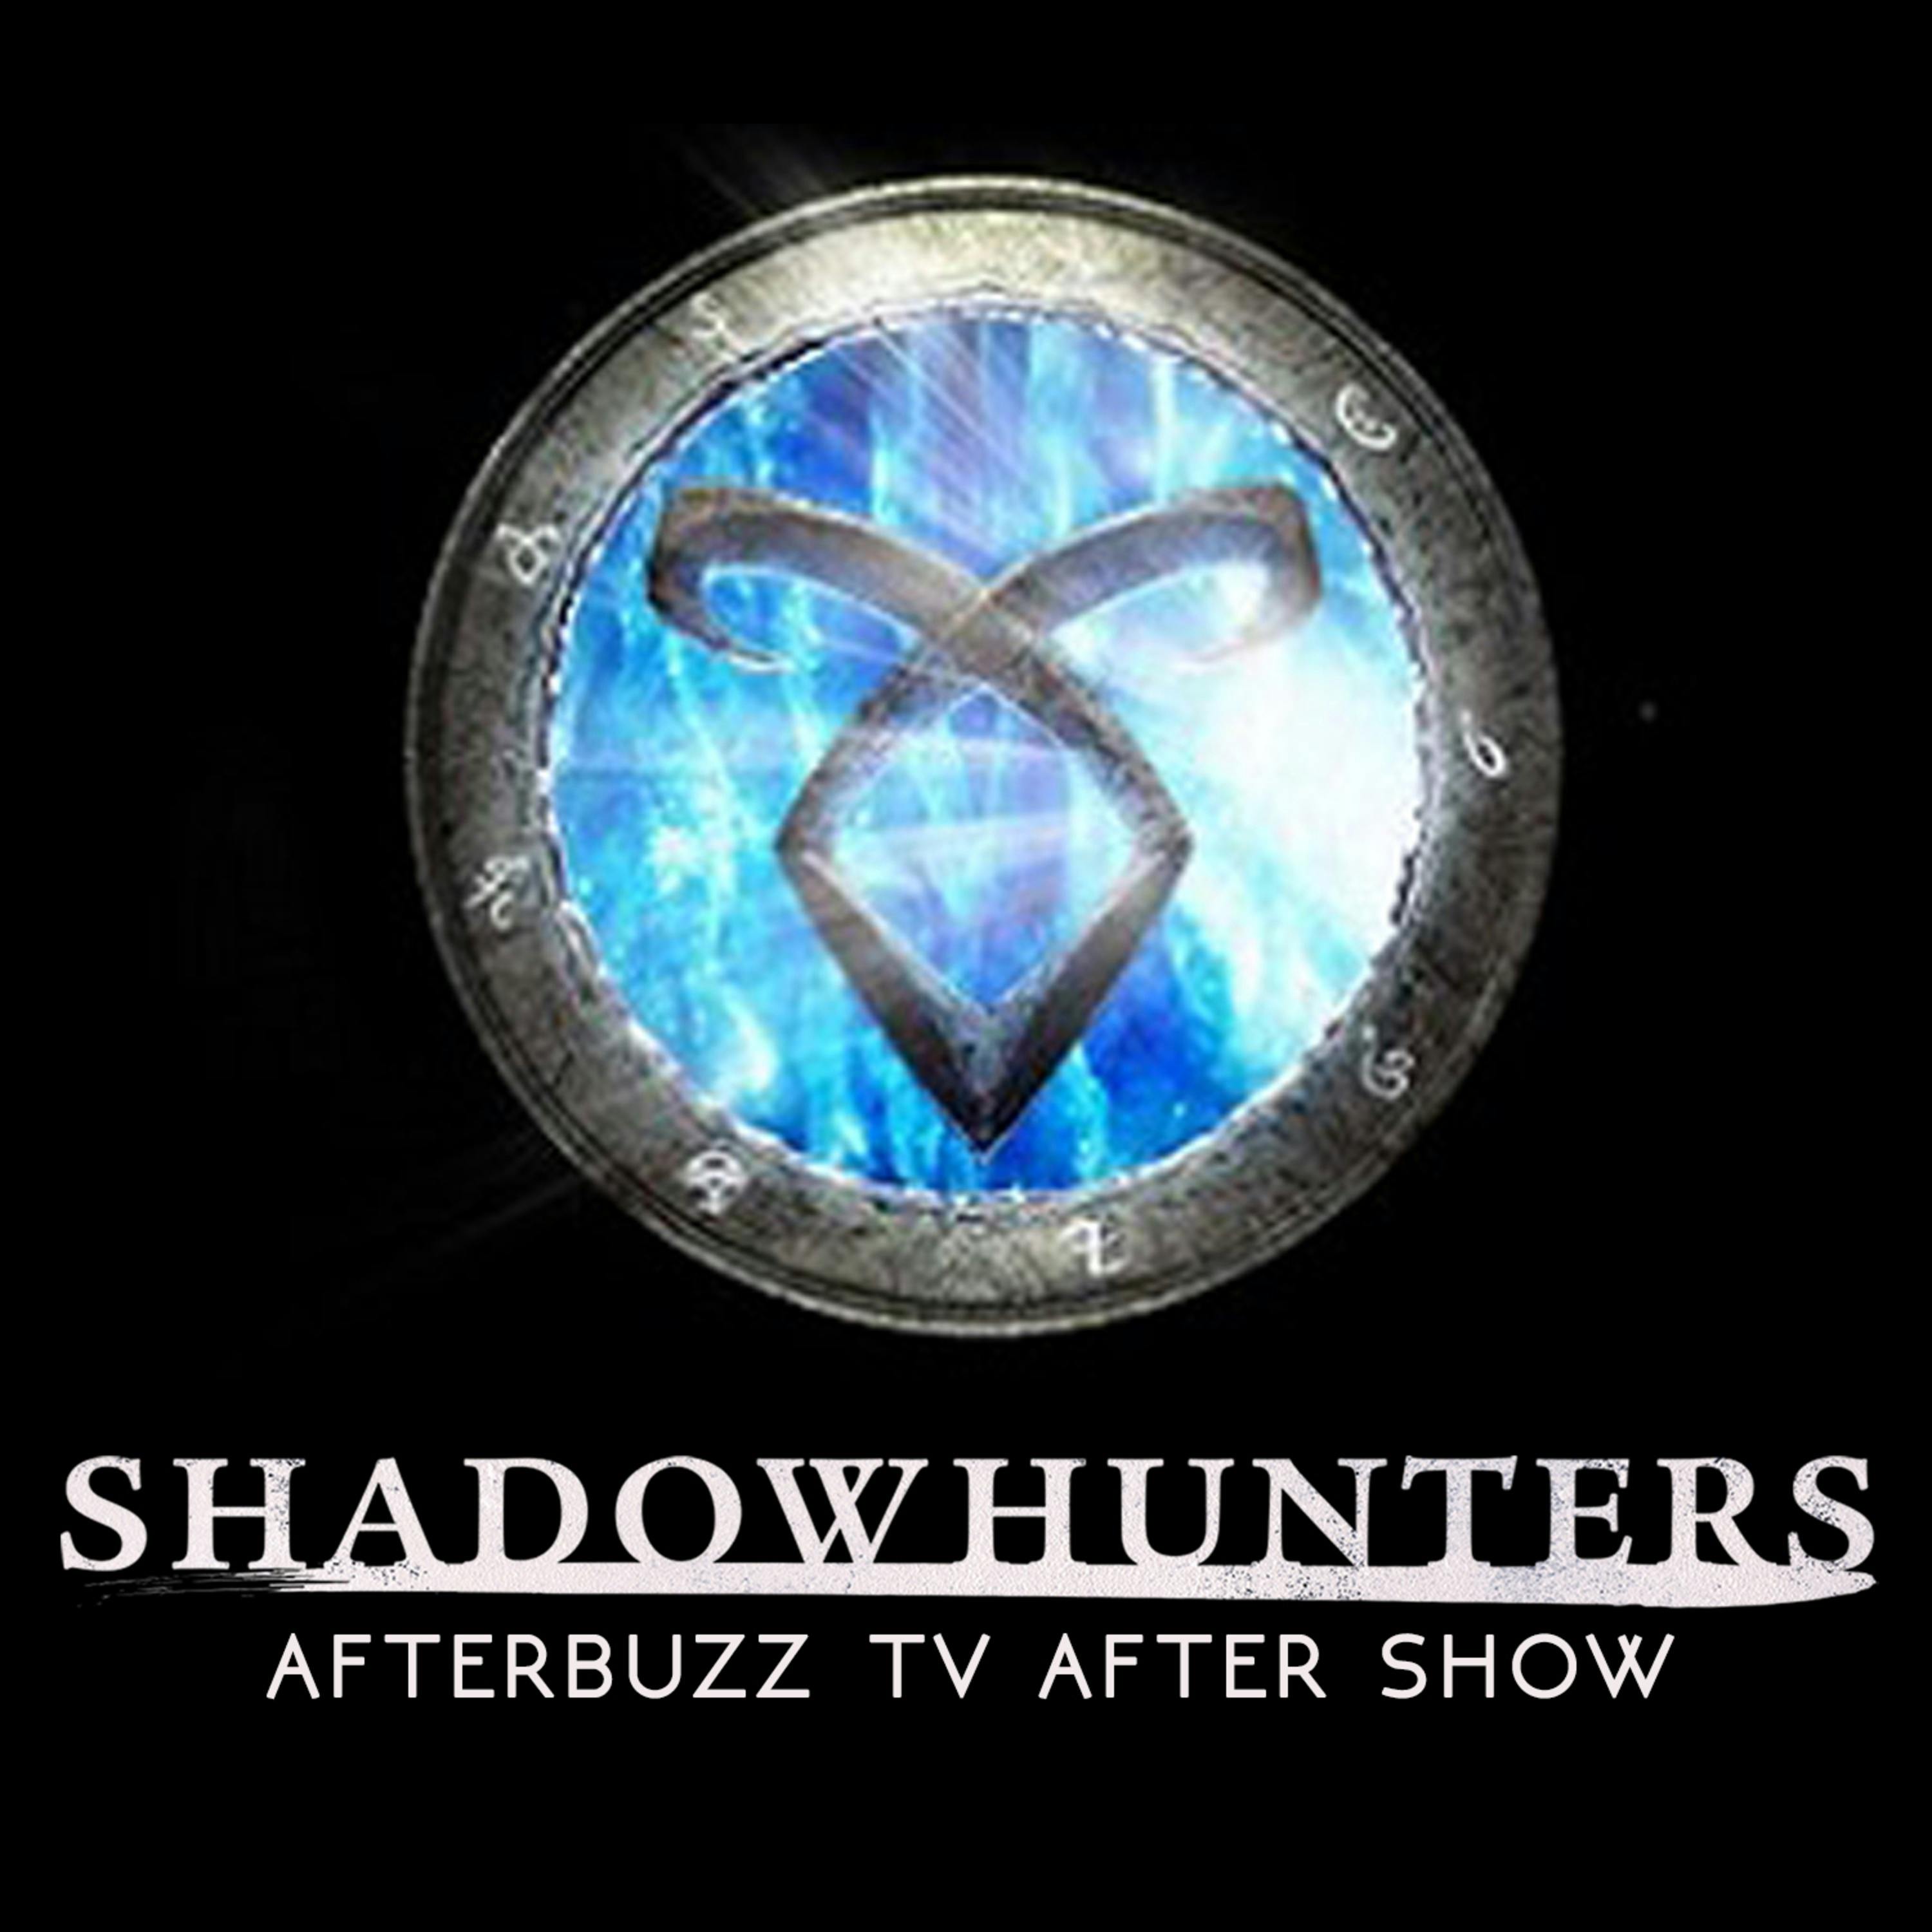 Shadowhunters S:1 | The Mortal Cup E:1 | AfterBuzz TV AfterShow